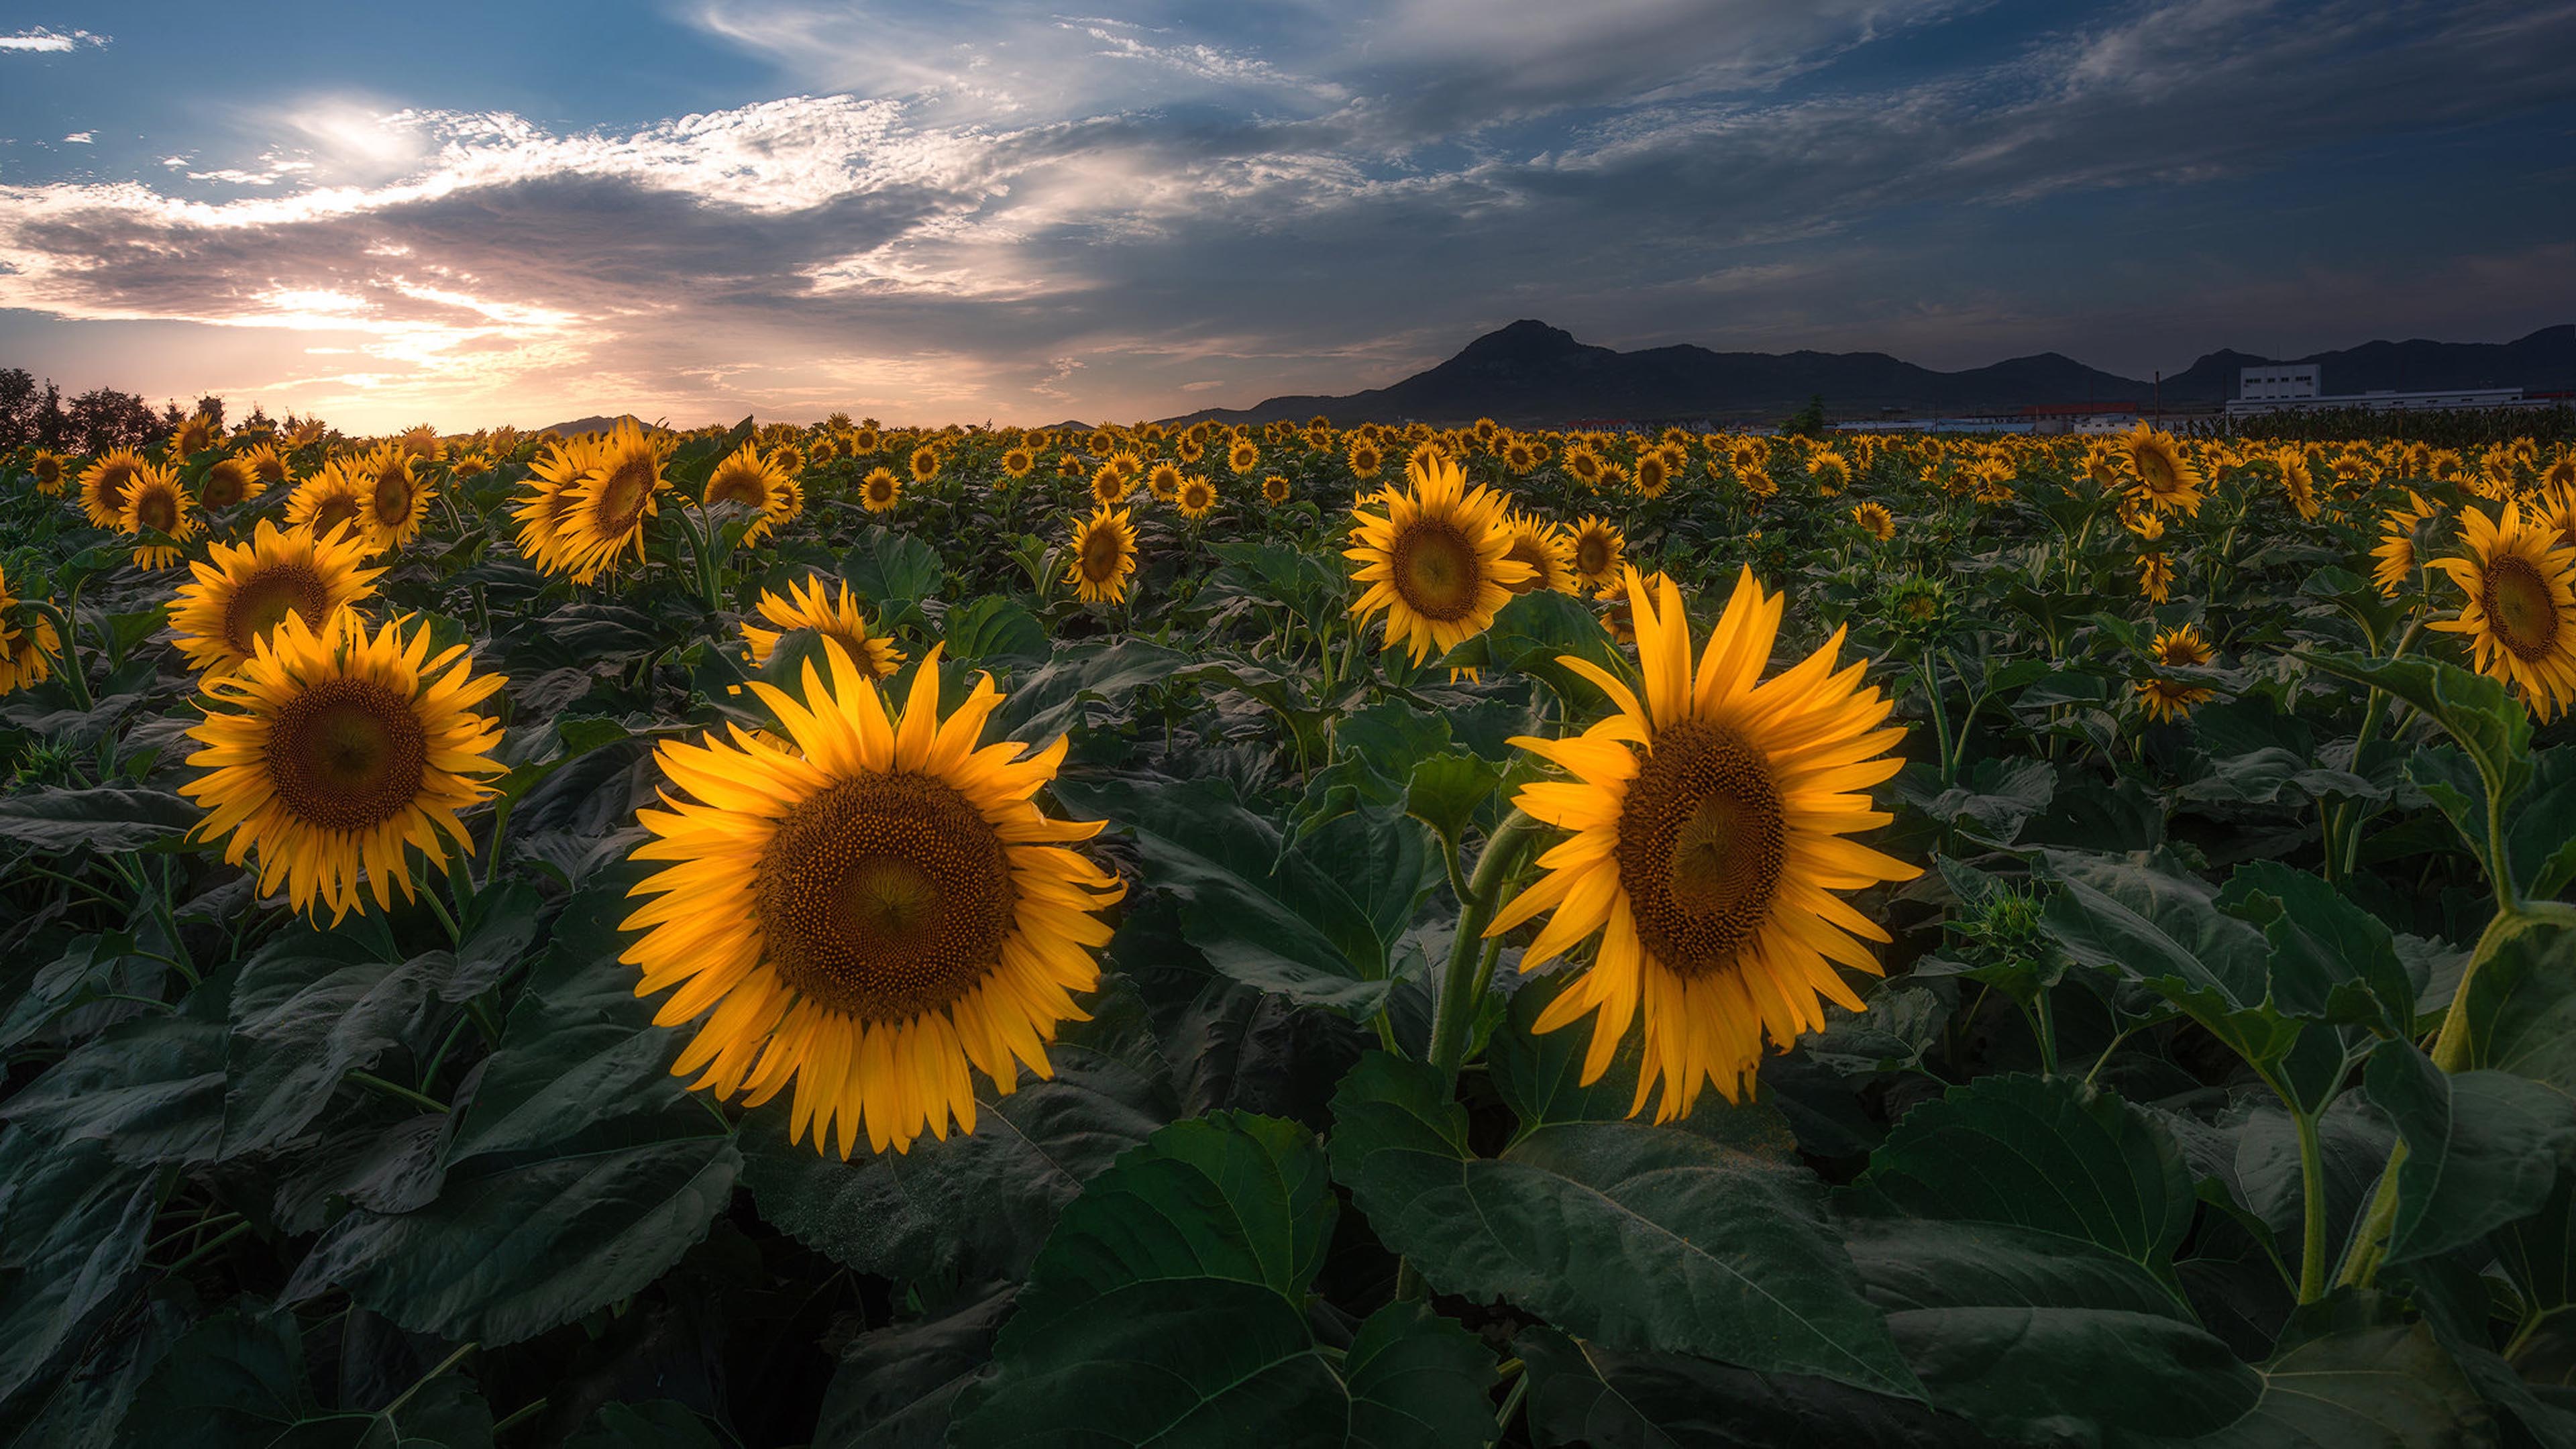 Plants Field With Sunflower Flowers With Yellow Petals Sunset Landscape